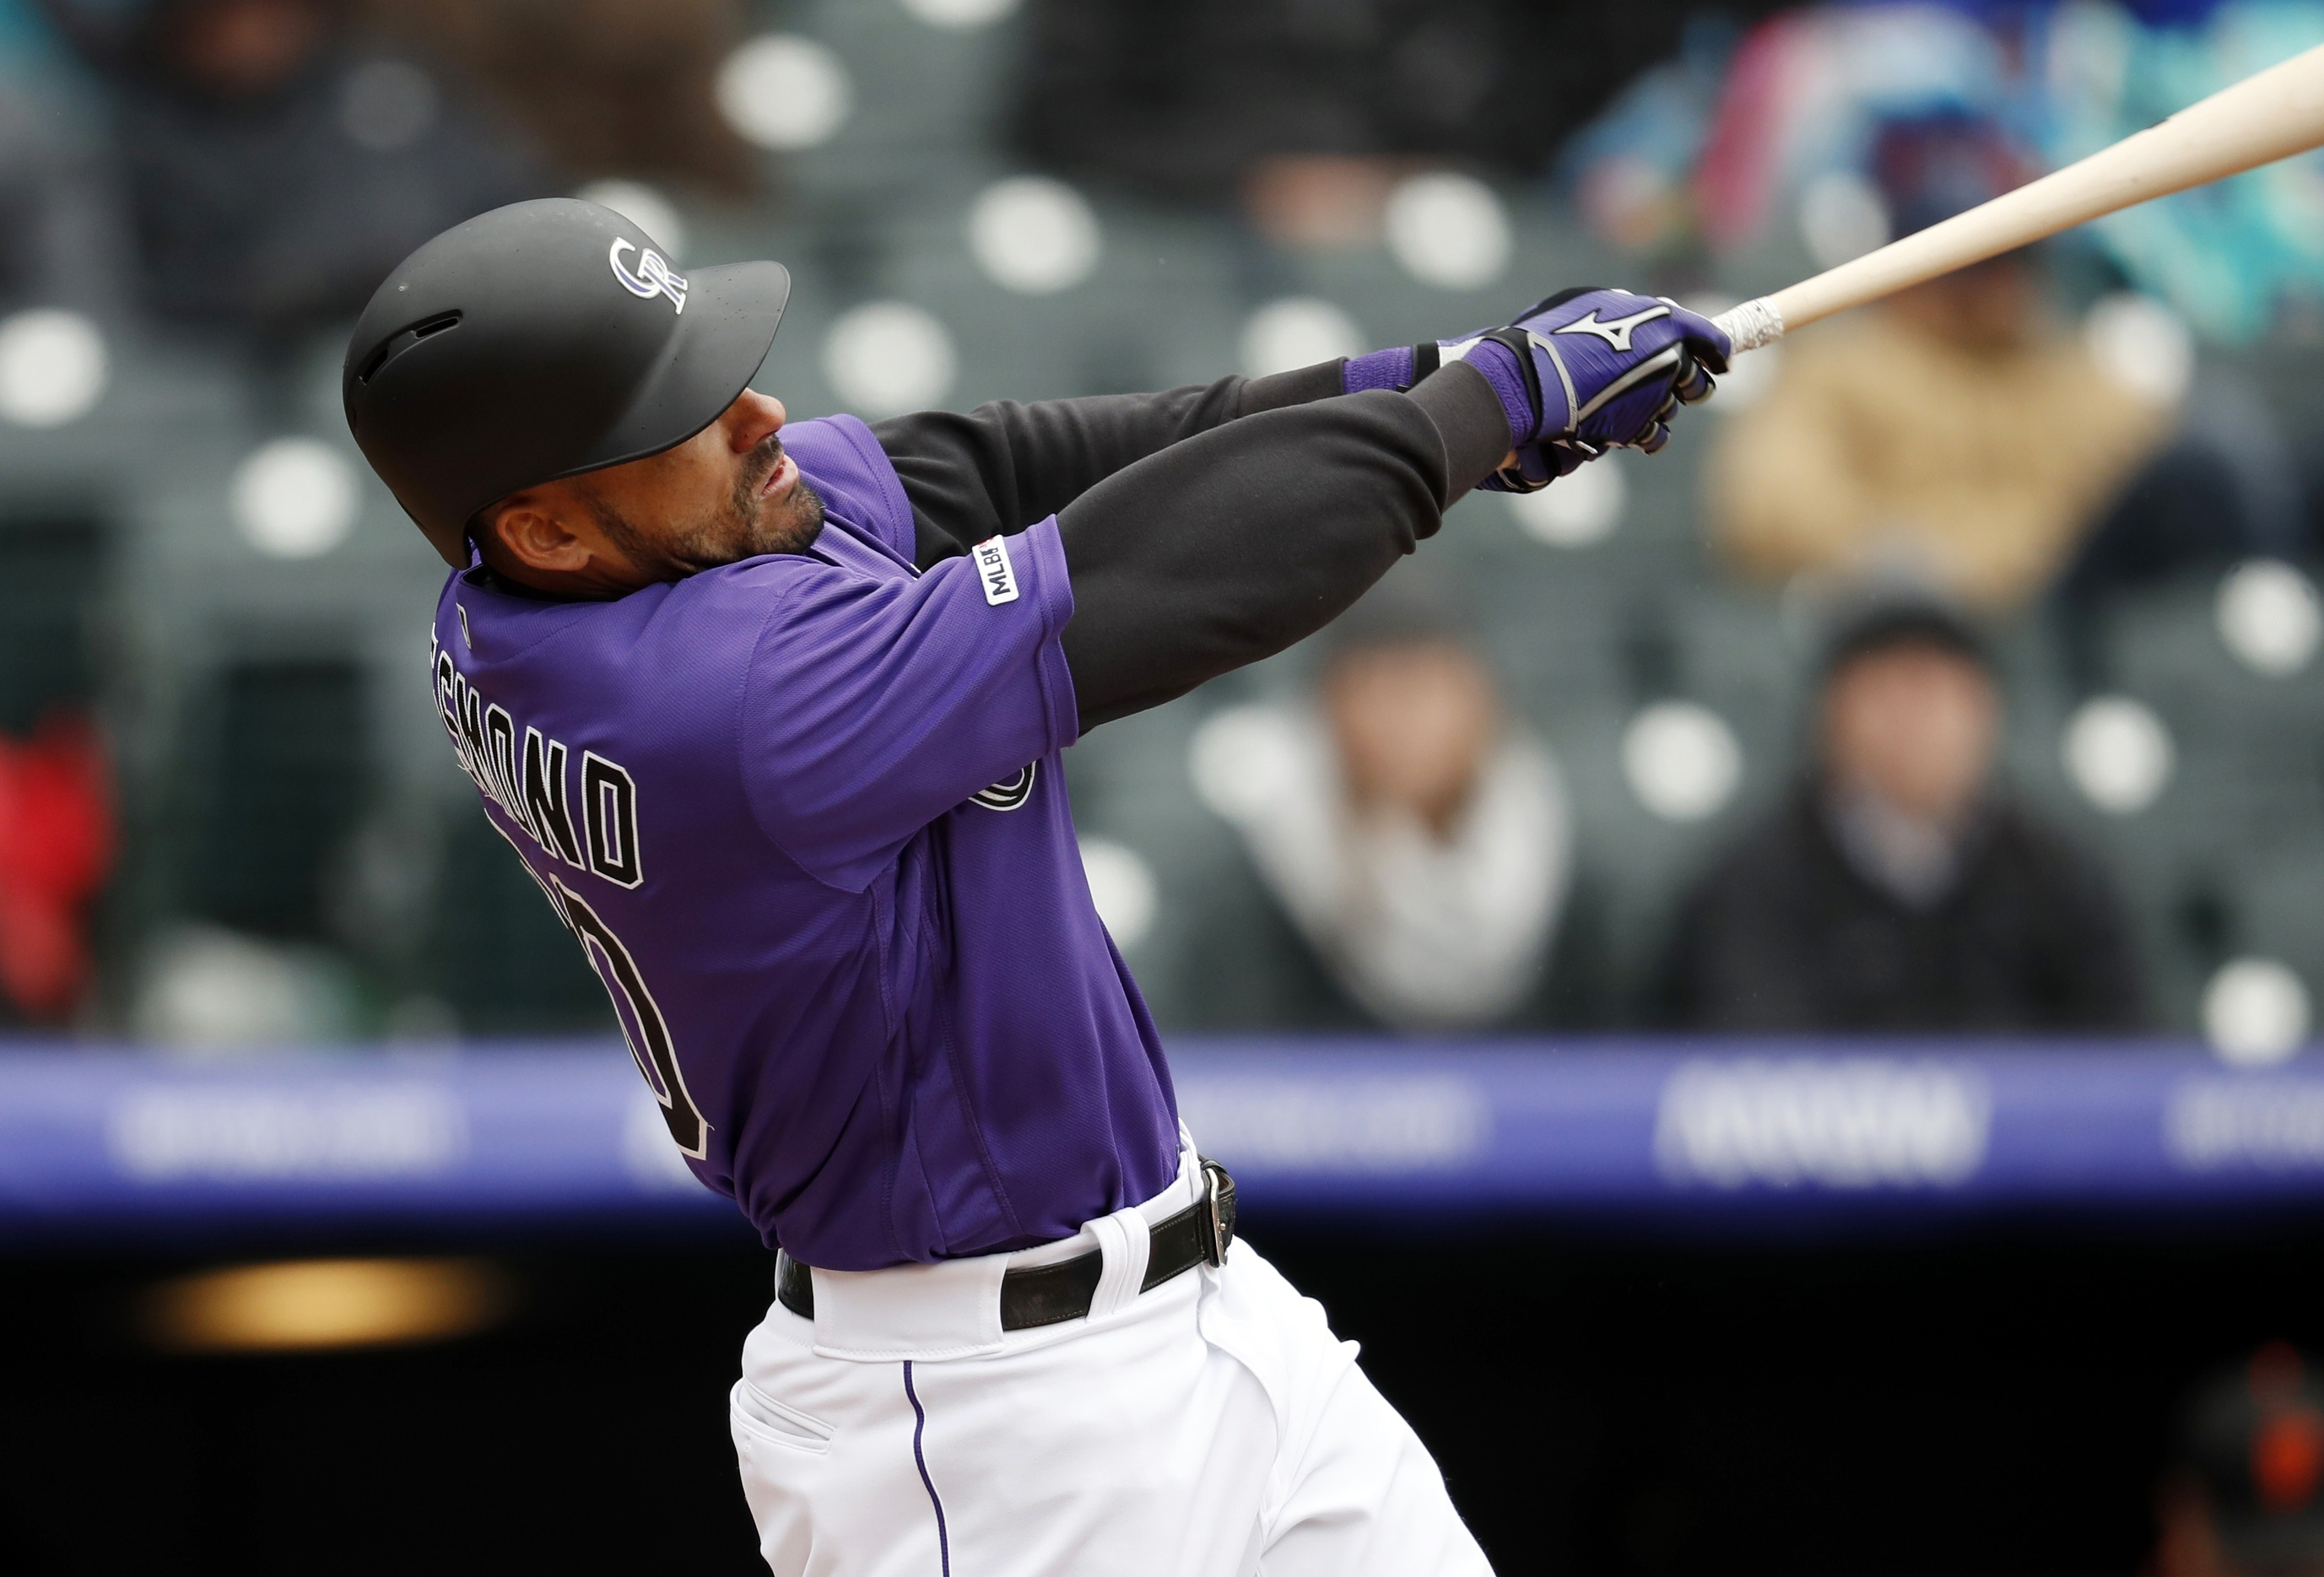 Rockies rally to beat Giants 12-11 at wintry Coors Field